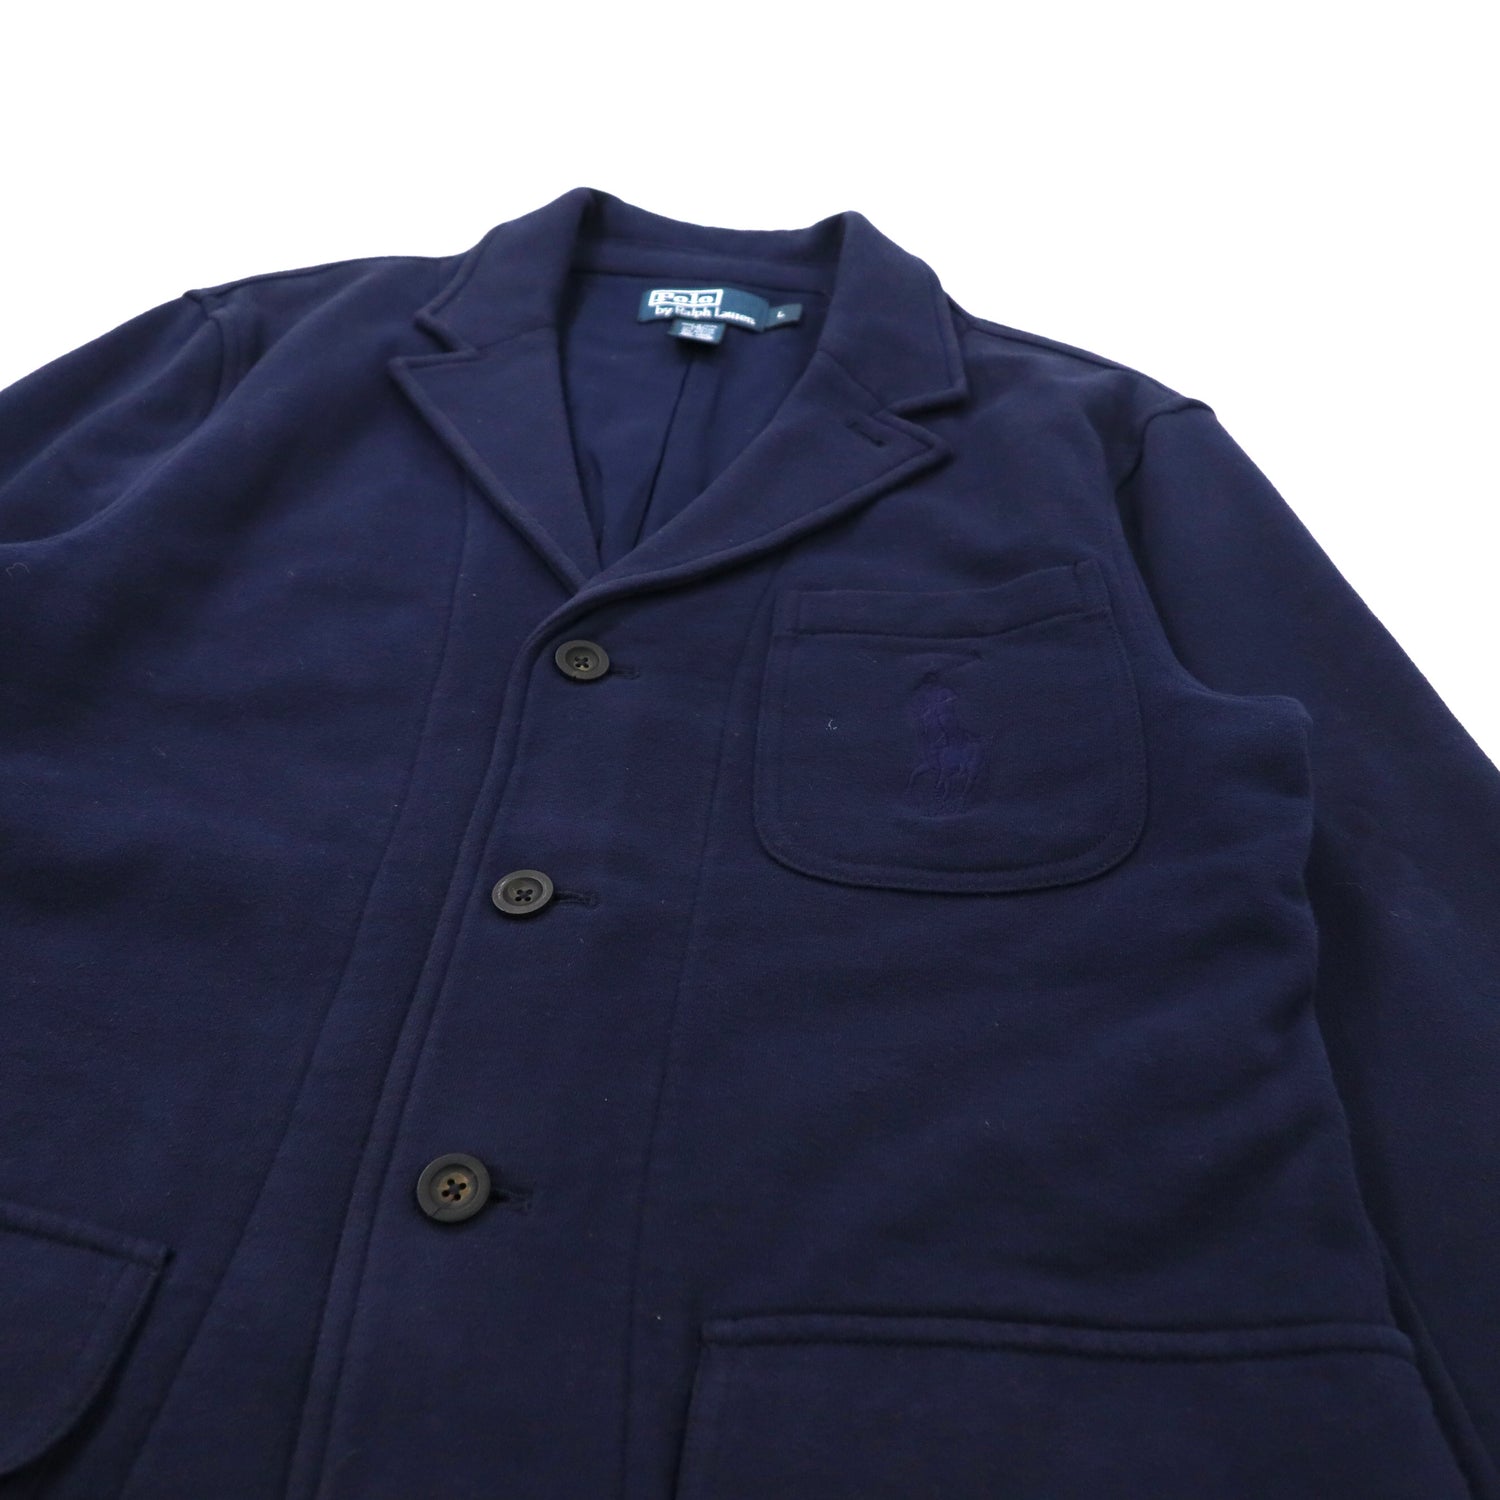 POLO BY RALPH LAUREN 3B Tailored Jacket L Navy cotton pony